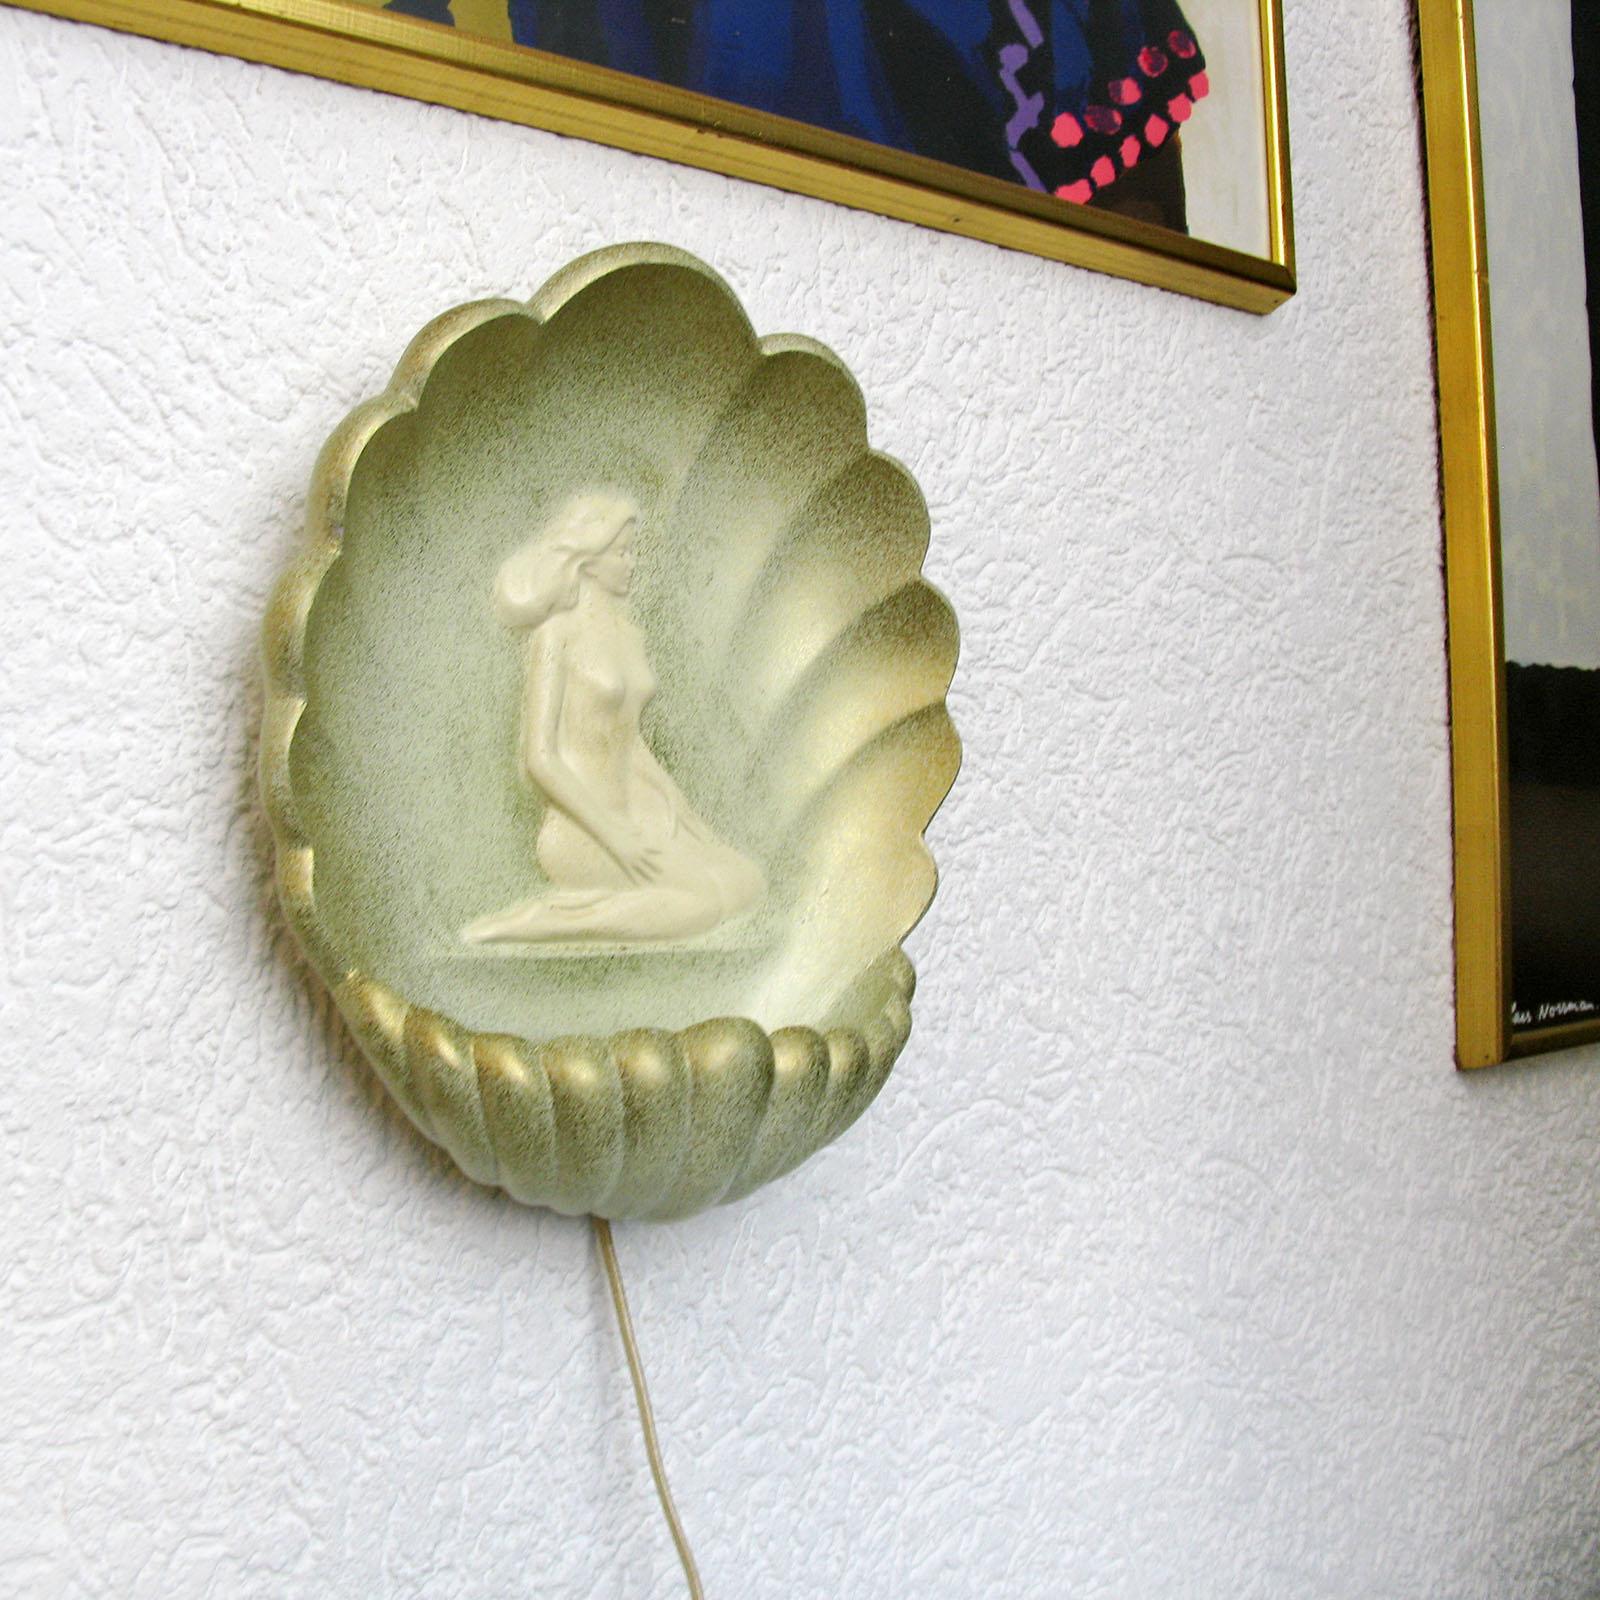 Art Deco plaster sconce wall light, France, 1930s

A beautifully shell shaped wall light. Plaster, with relief nude girl in center, in holds a light in the bottom part. Light green background, white nude, gilt enhancement to the sides.
Very good